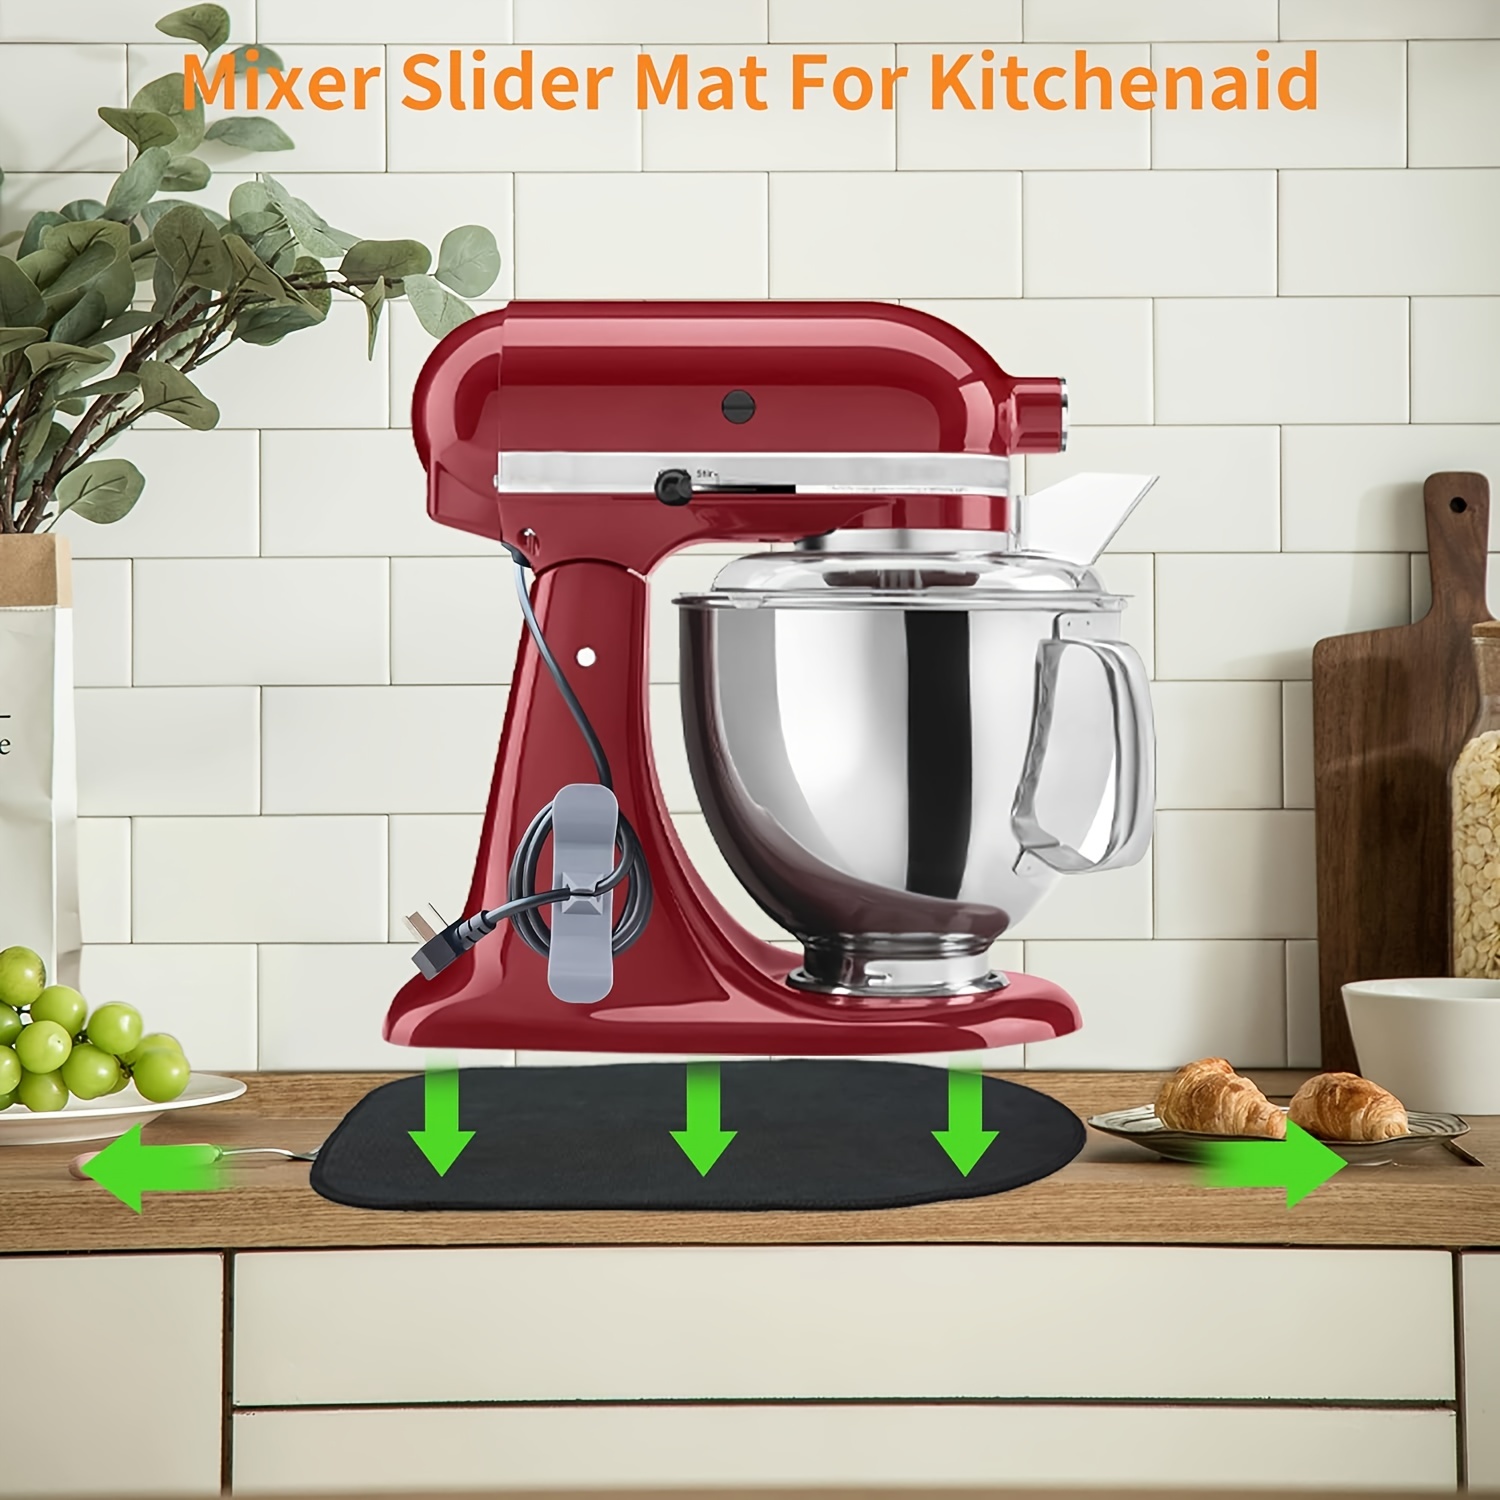 Bamboo Mixer Slider Compatible with Kitchen aid Bowl Lift 5-8 Qt Stand Mixer